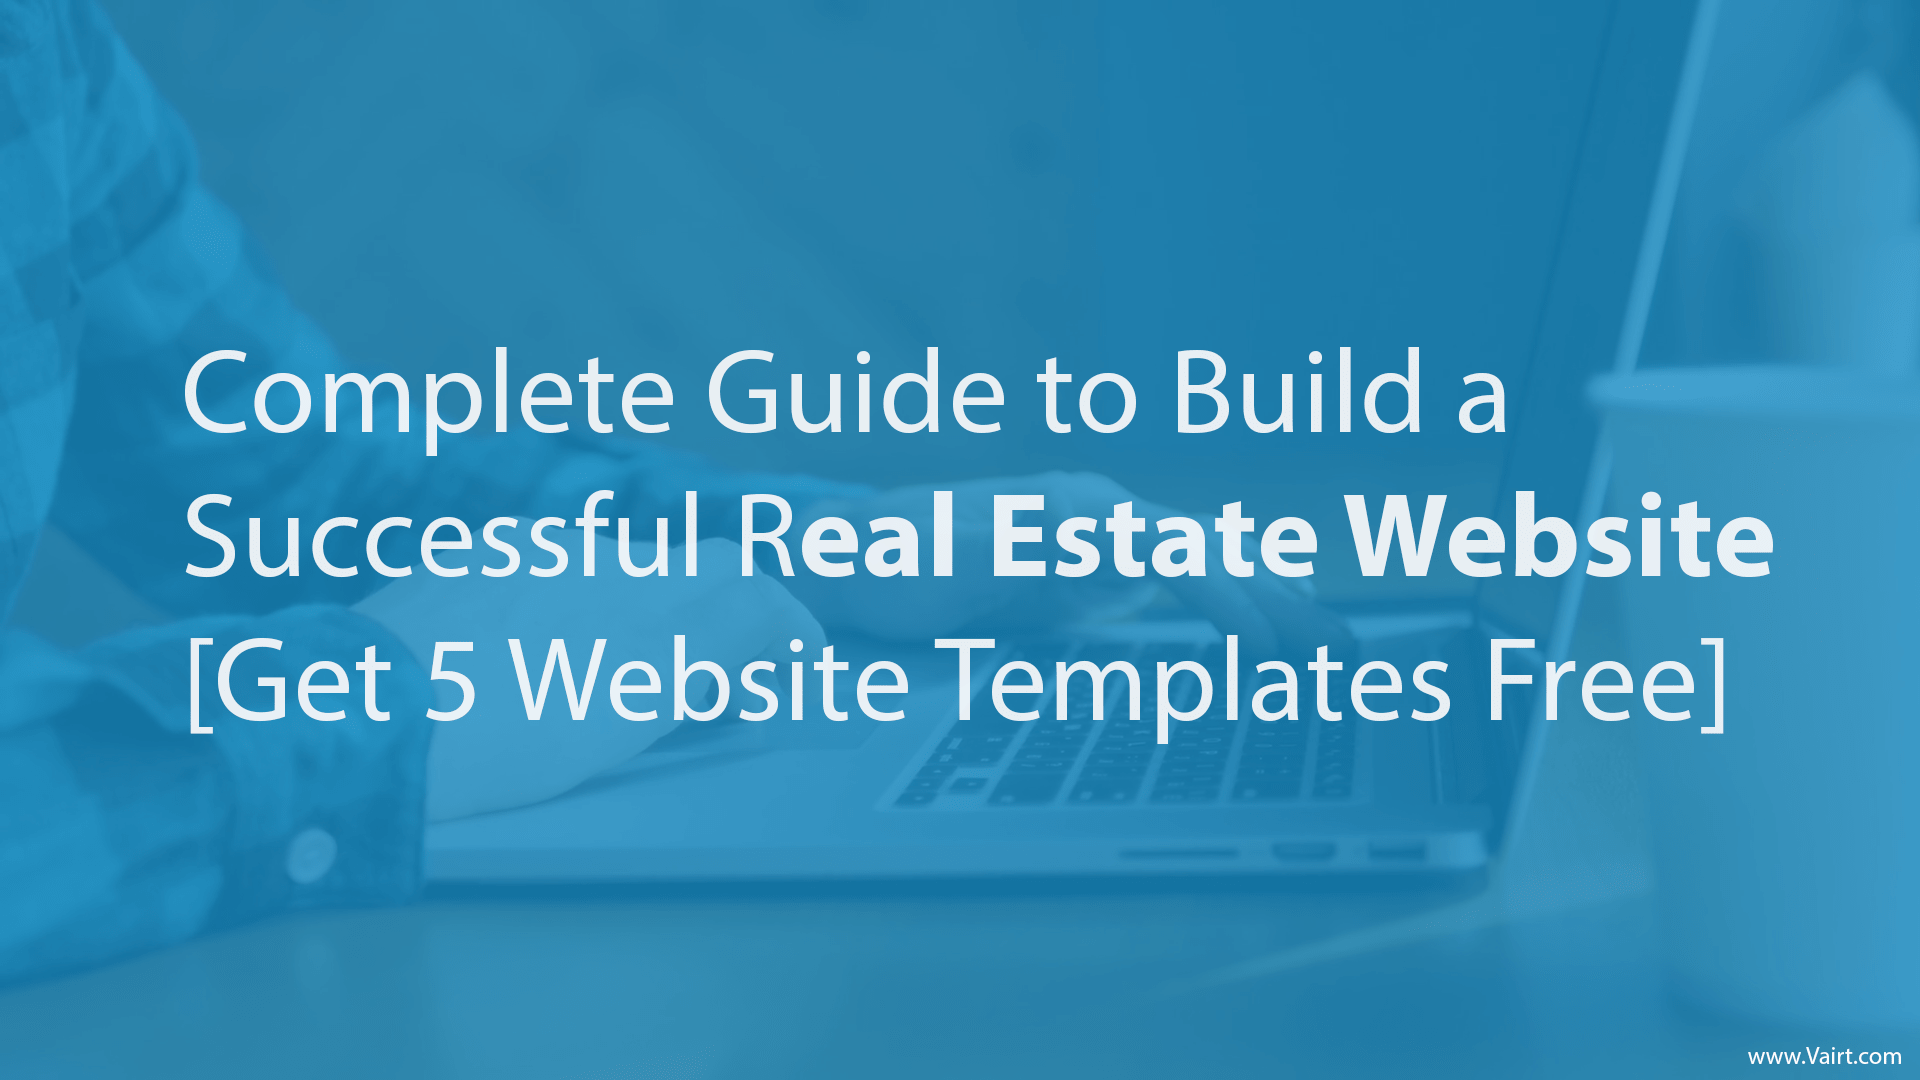 Complete Guide to Build a Successful Real Estate Website